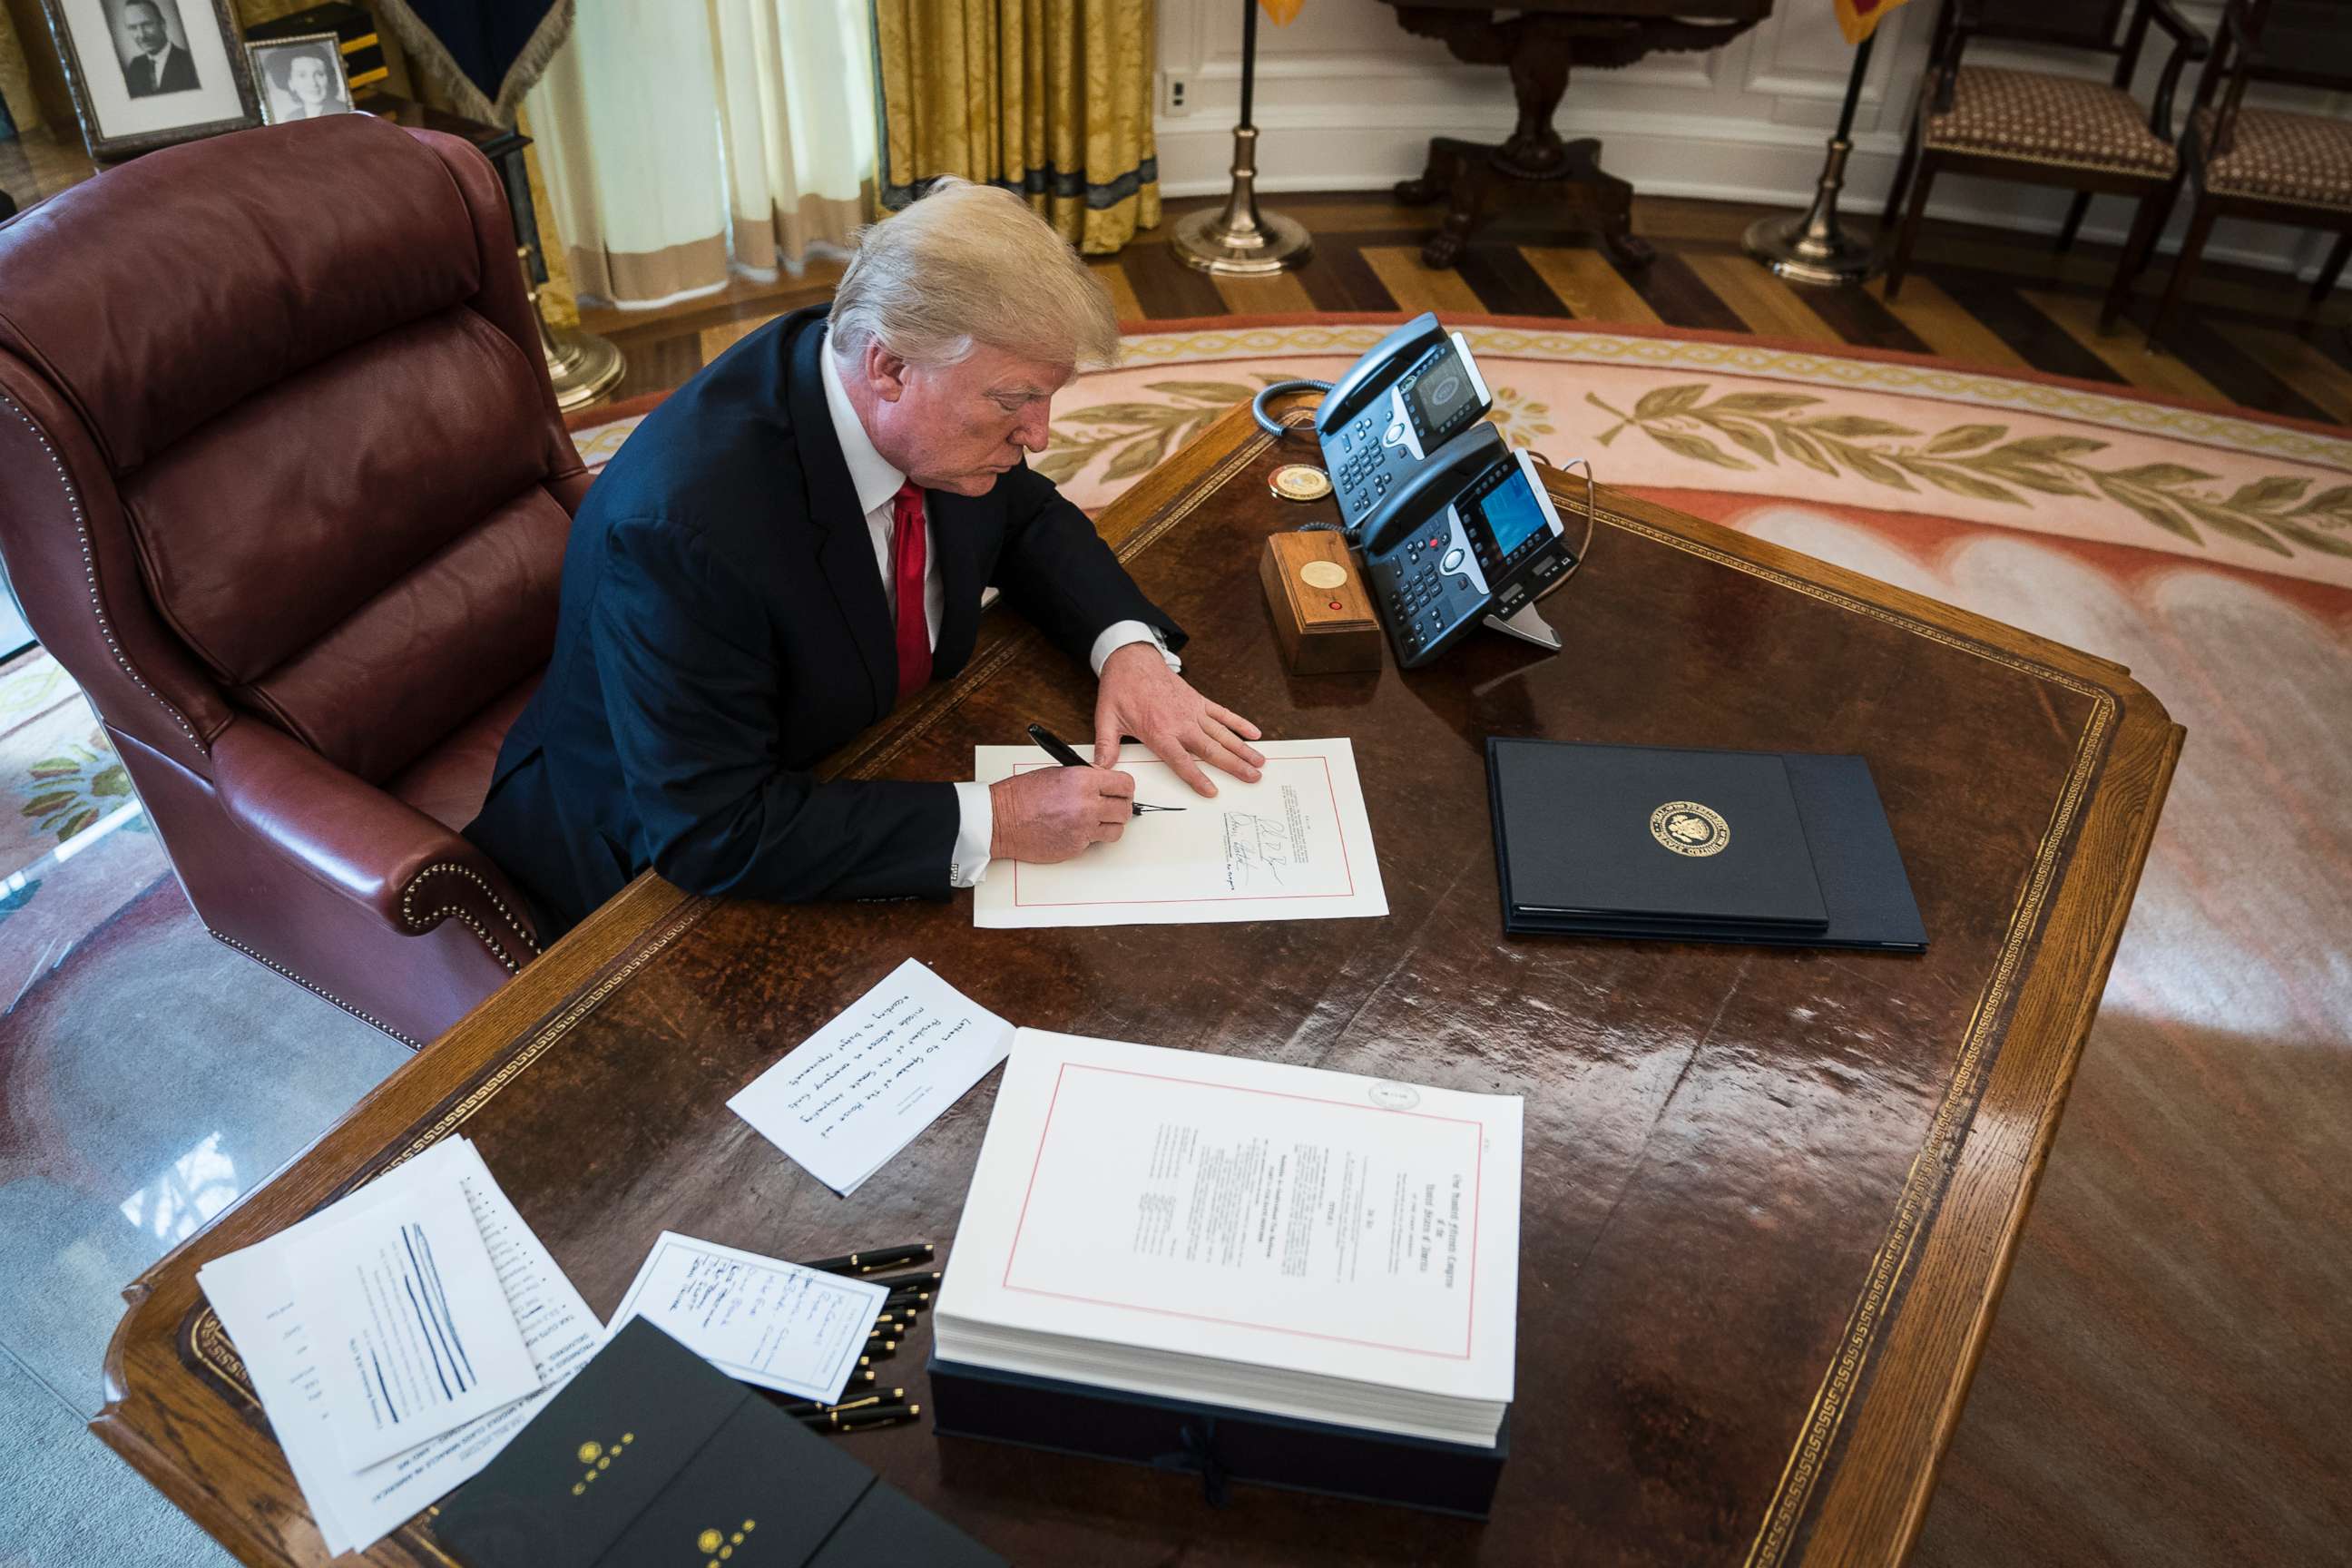 PHOTO: President Donald Trump signs the Tax Cut and Reform Bill, a $1.5 trillion tax overhaul package, into law in the Oval Office at the White House in Washington, D.C., Dec. 22, 2017. 